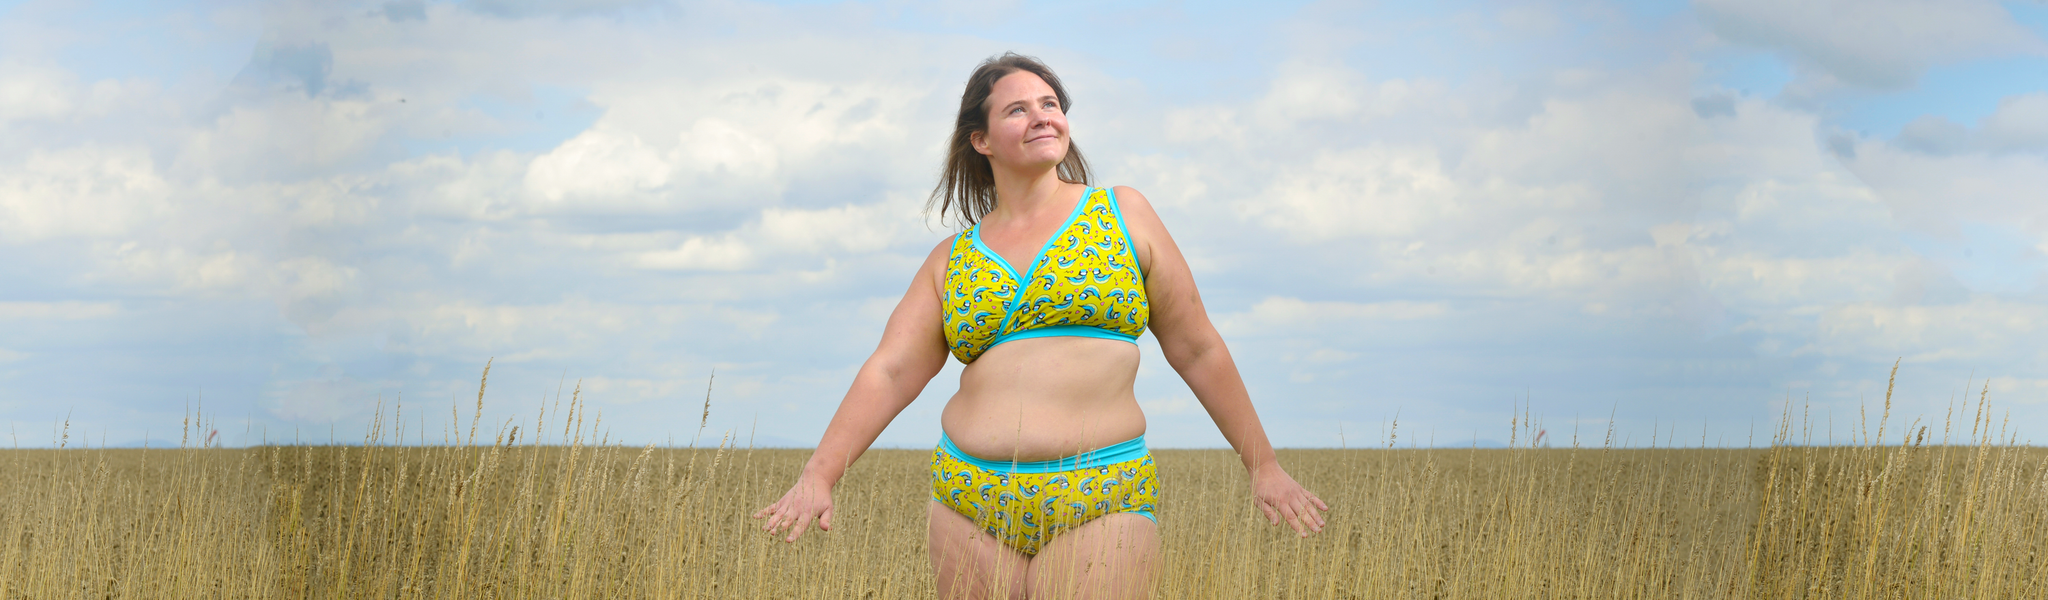 A woman stands in a field of wheat with her arms out and the sky is blue. She looks content. She is wearing a set of Molke underwear in the Blue Tits fabric. It is yellow with illustrated birds on it an a light blue trim.